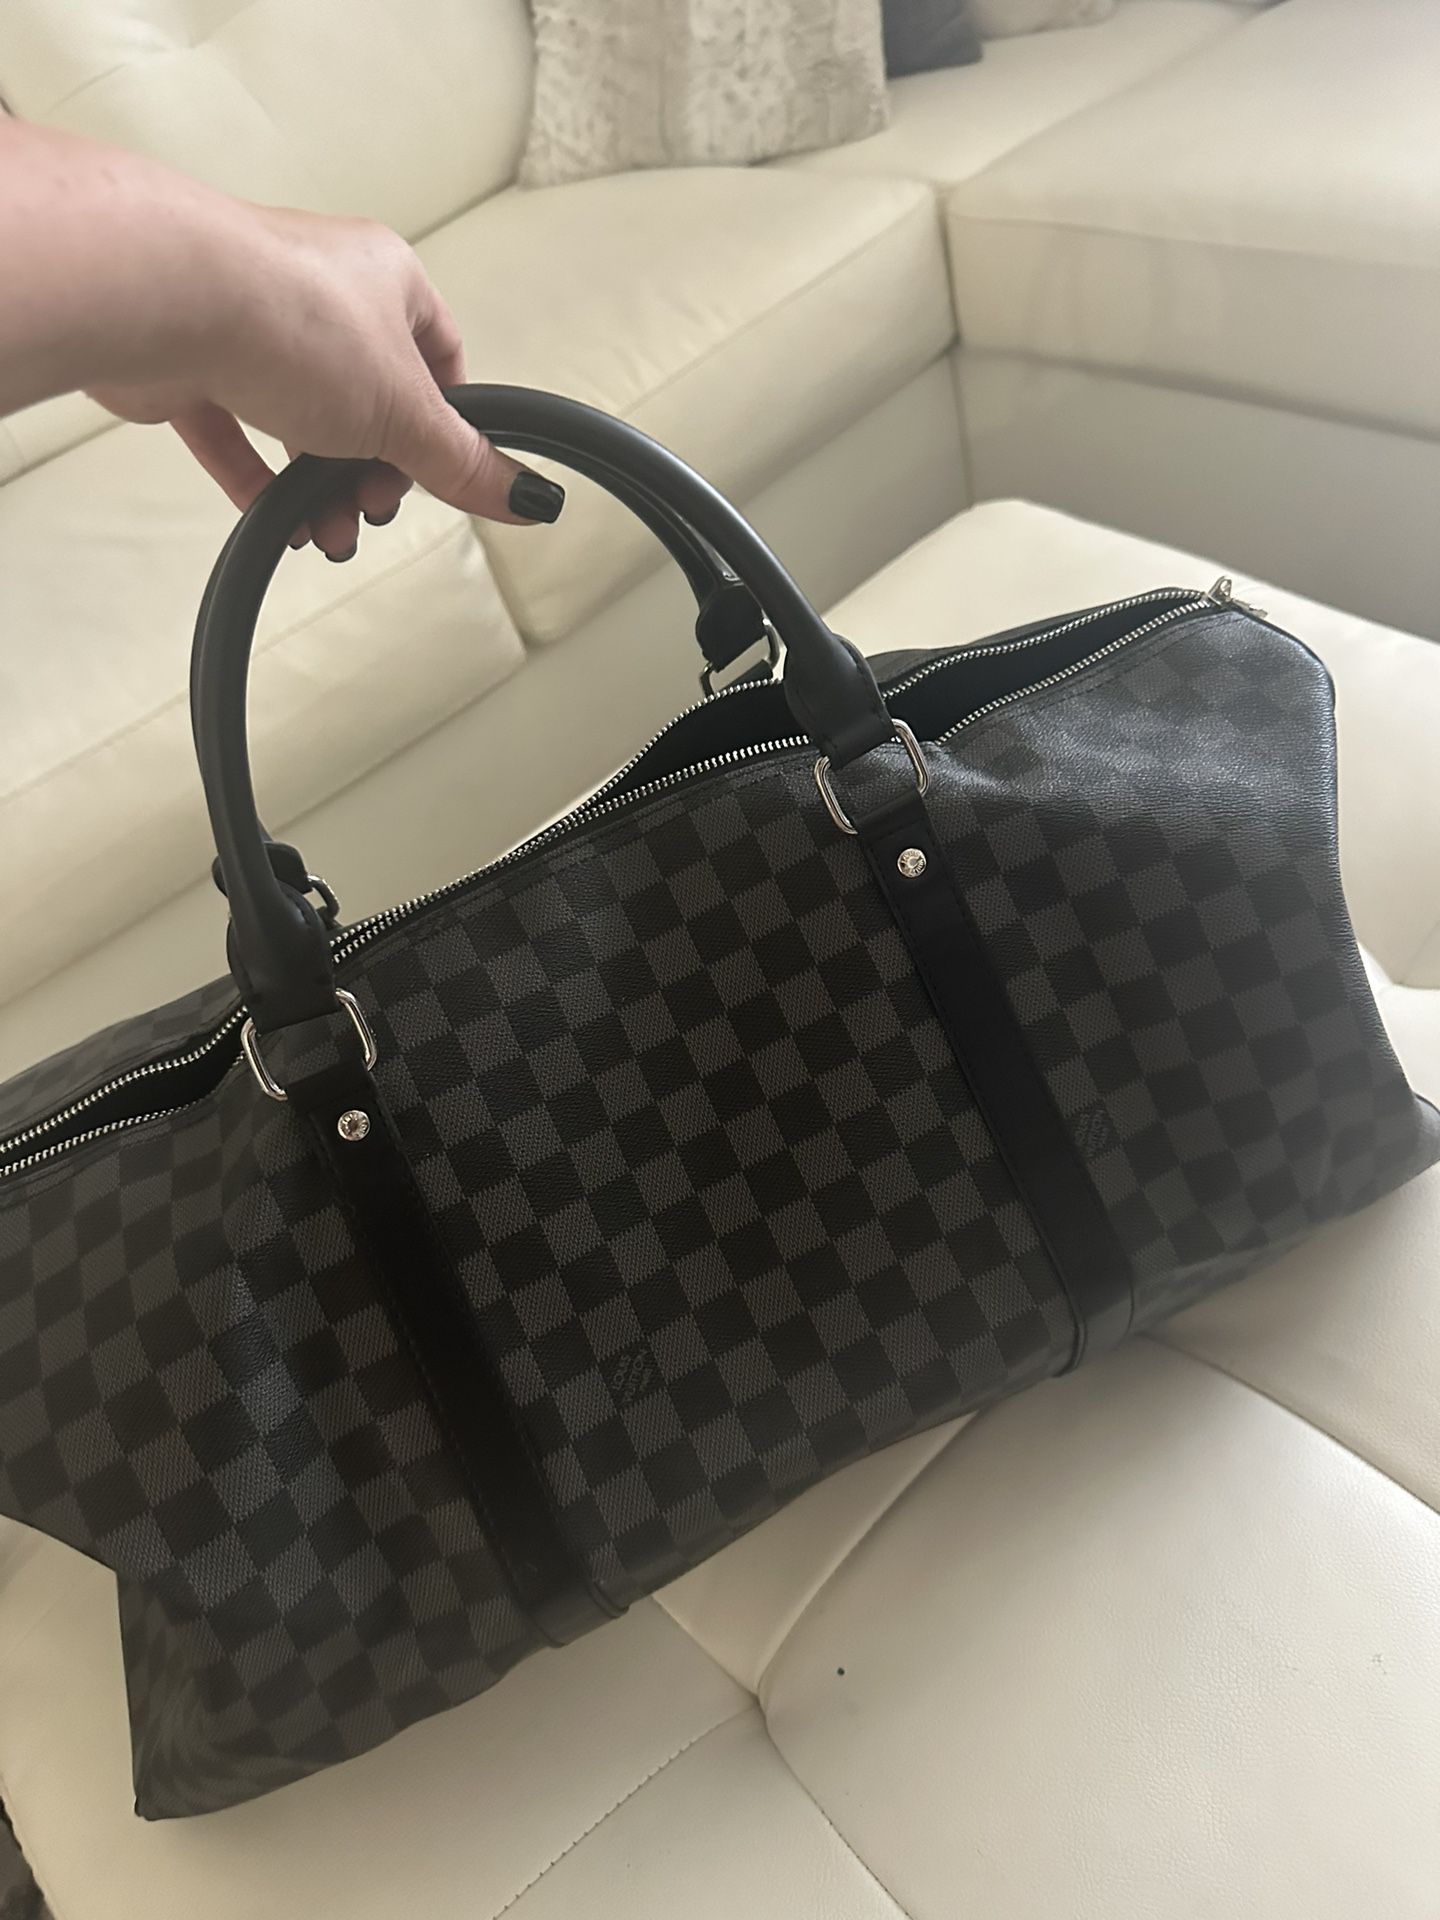 Louis Vuitton Keepall 55 Travel Bag - VINTAGE for Sale in Boca Raton, FL -  OfferUp